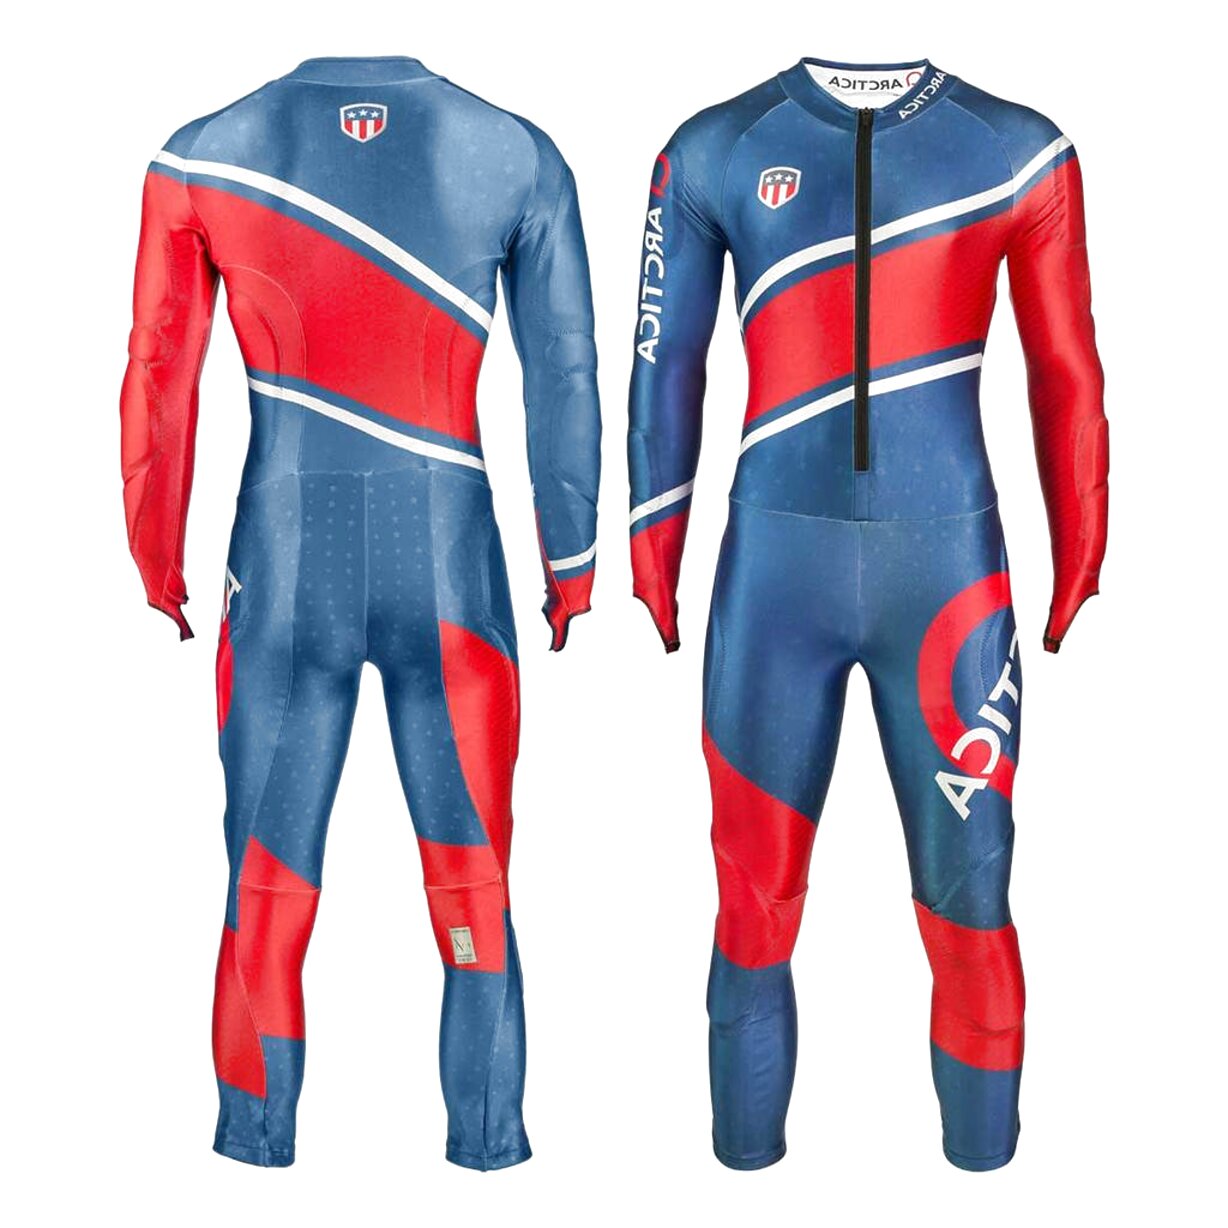 Ski Race Suit for sale in UK | 31 used Ski Race Suits